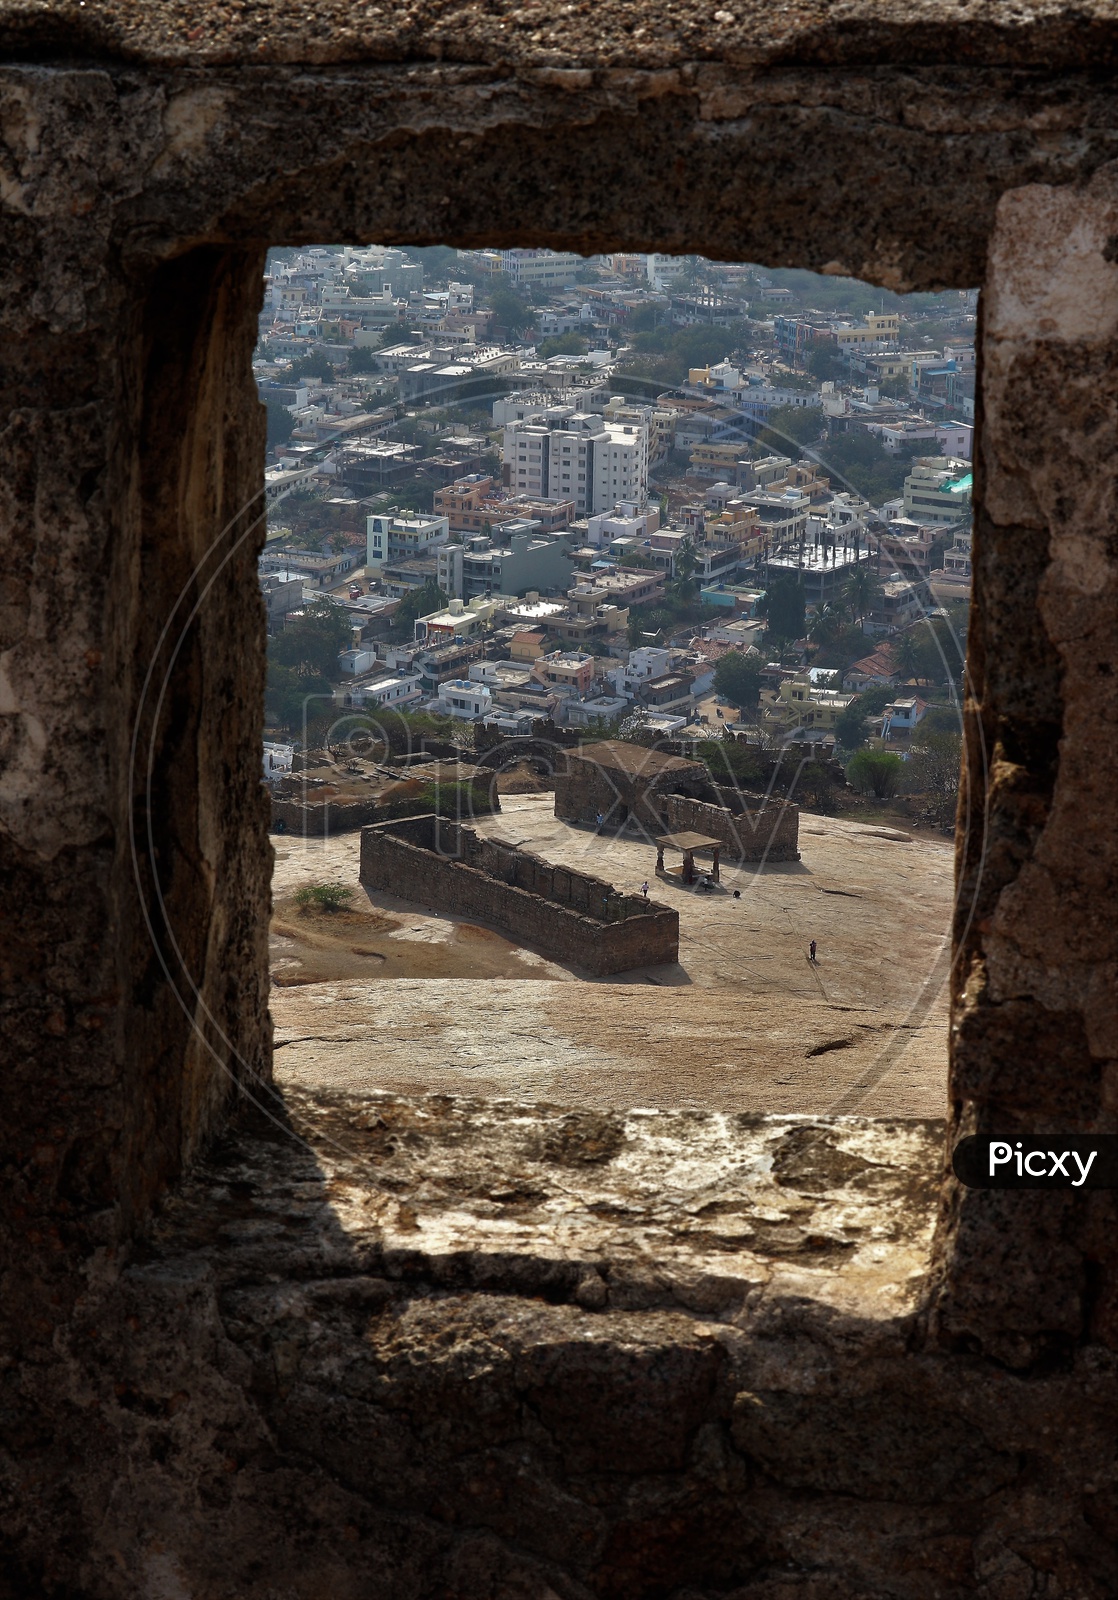 A View of City Scape From The Windows Of Bhongir Fort